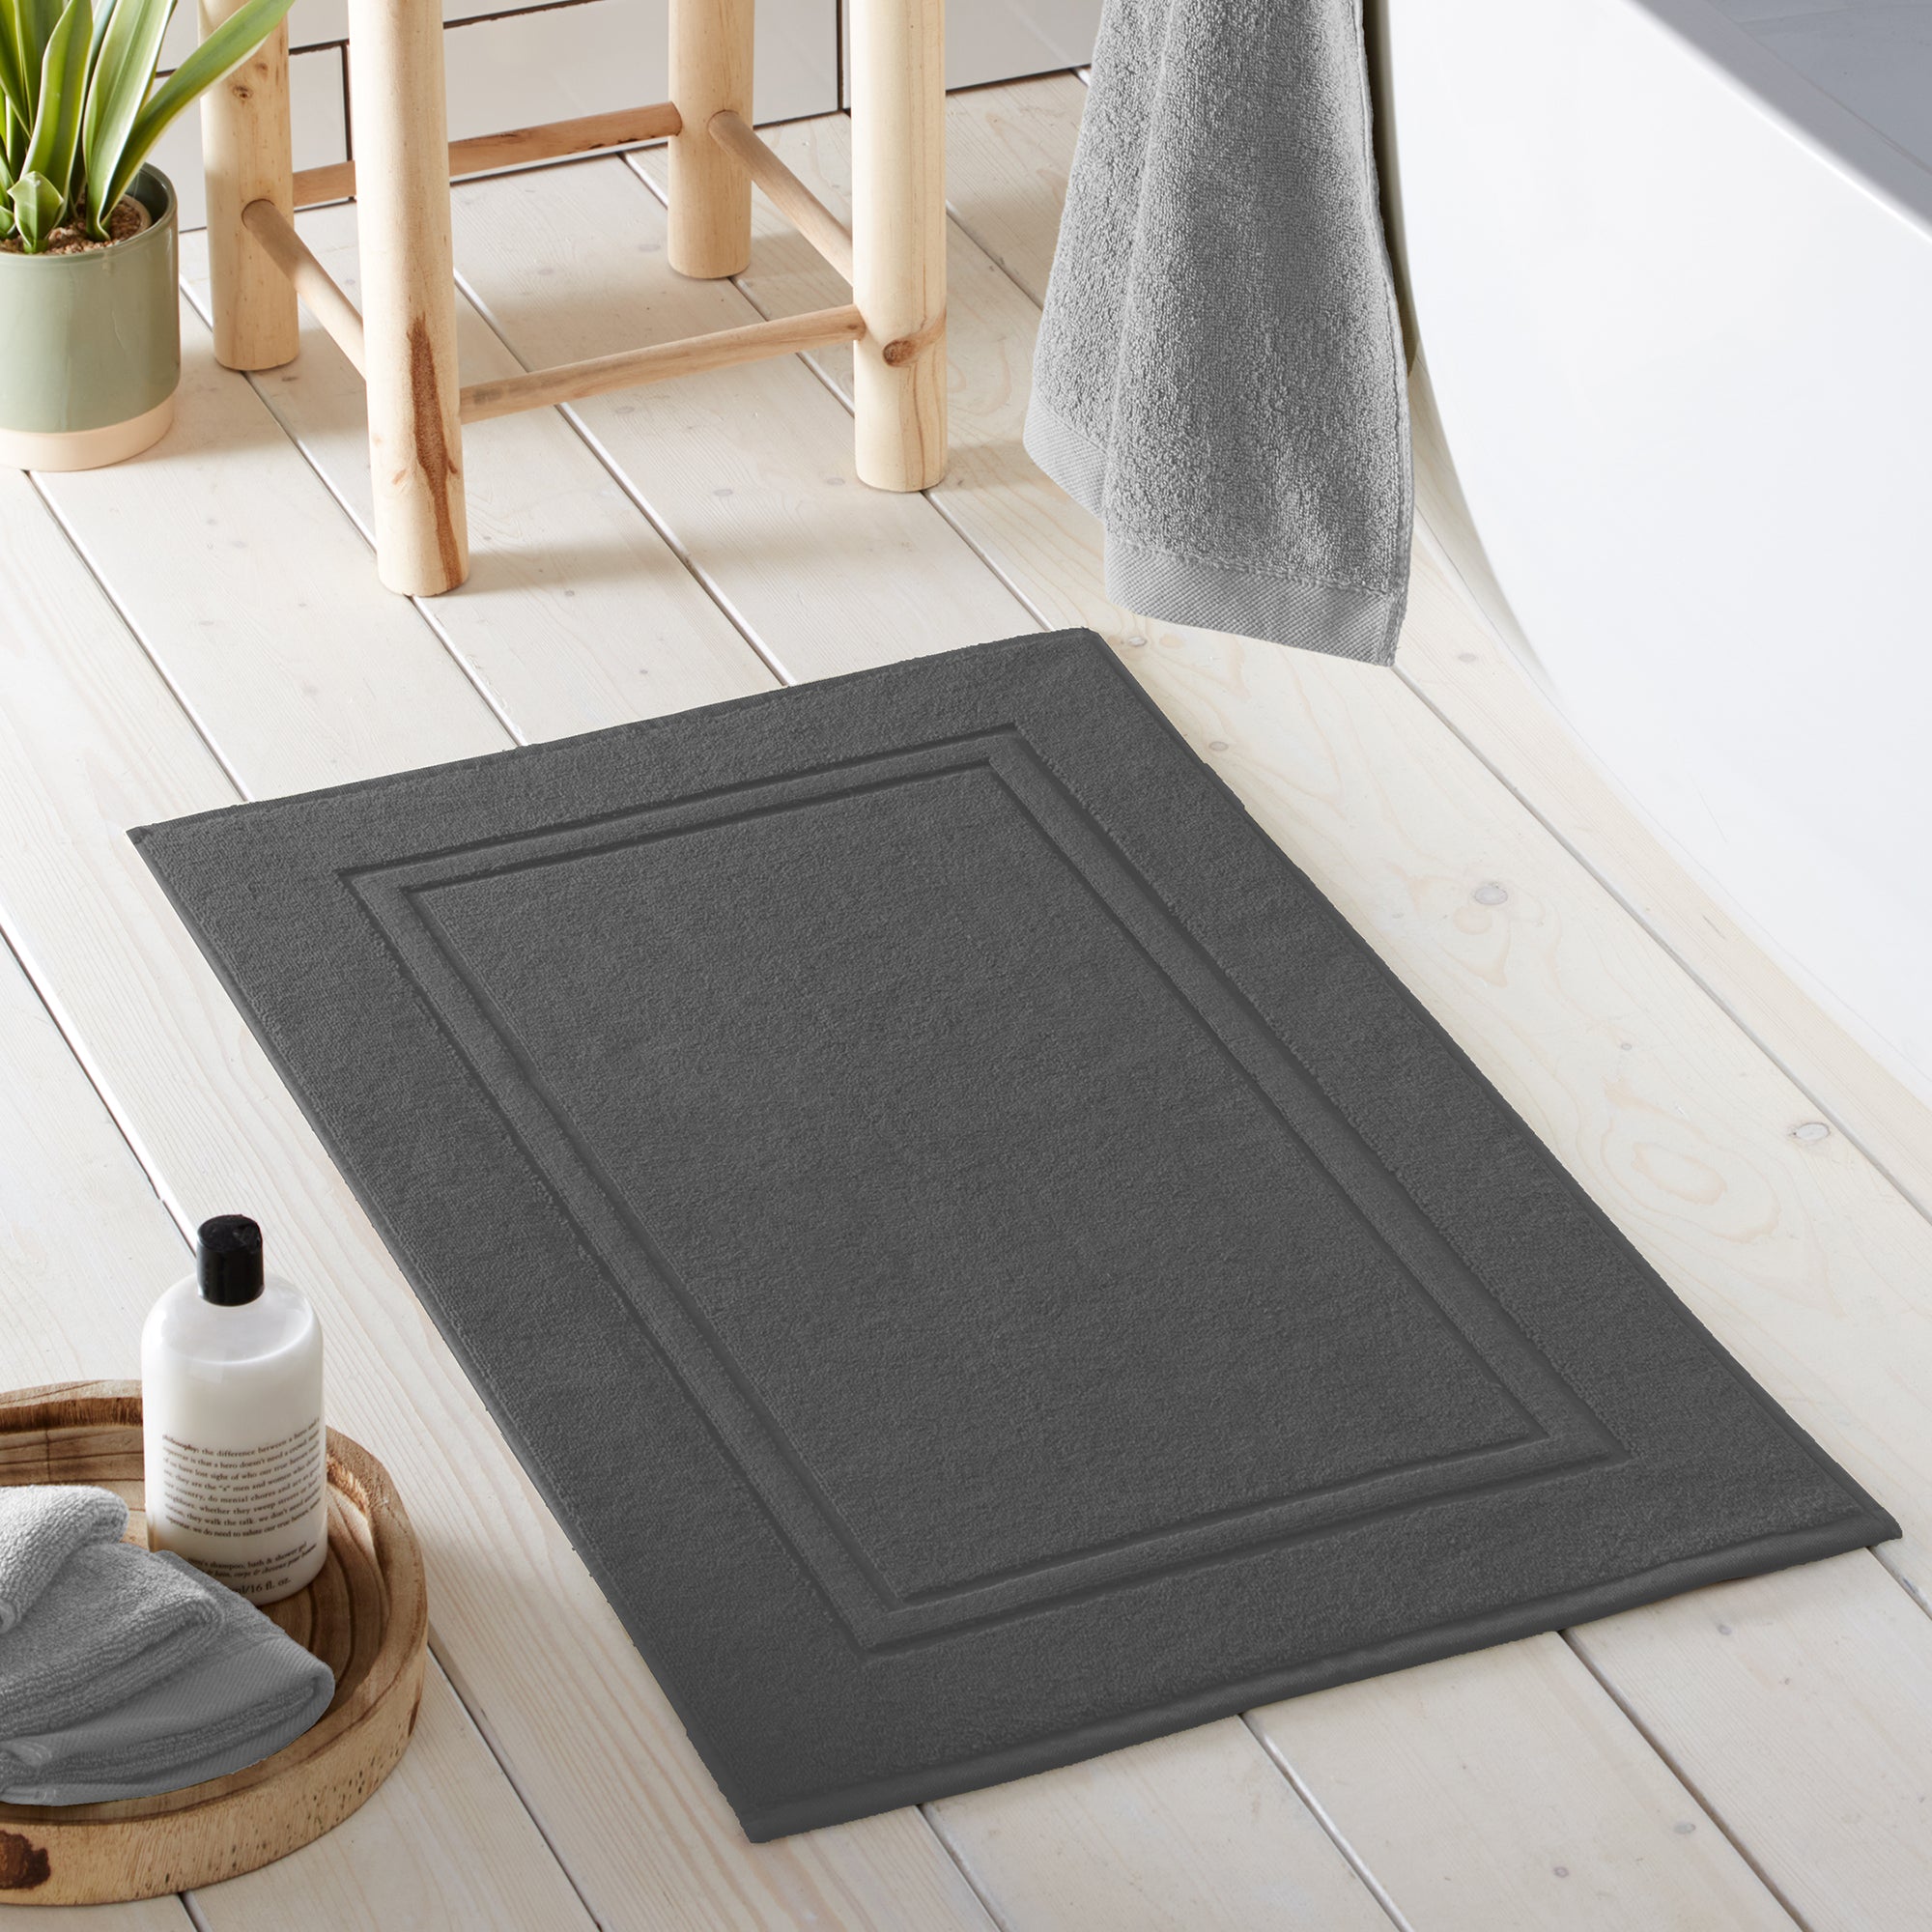 Bath Mat Abode Eco by Drift Home in Charcoal